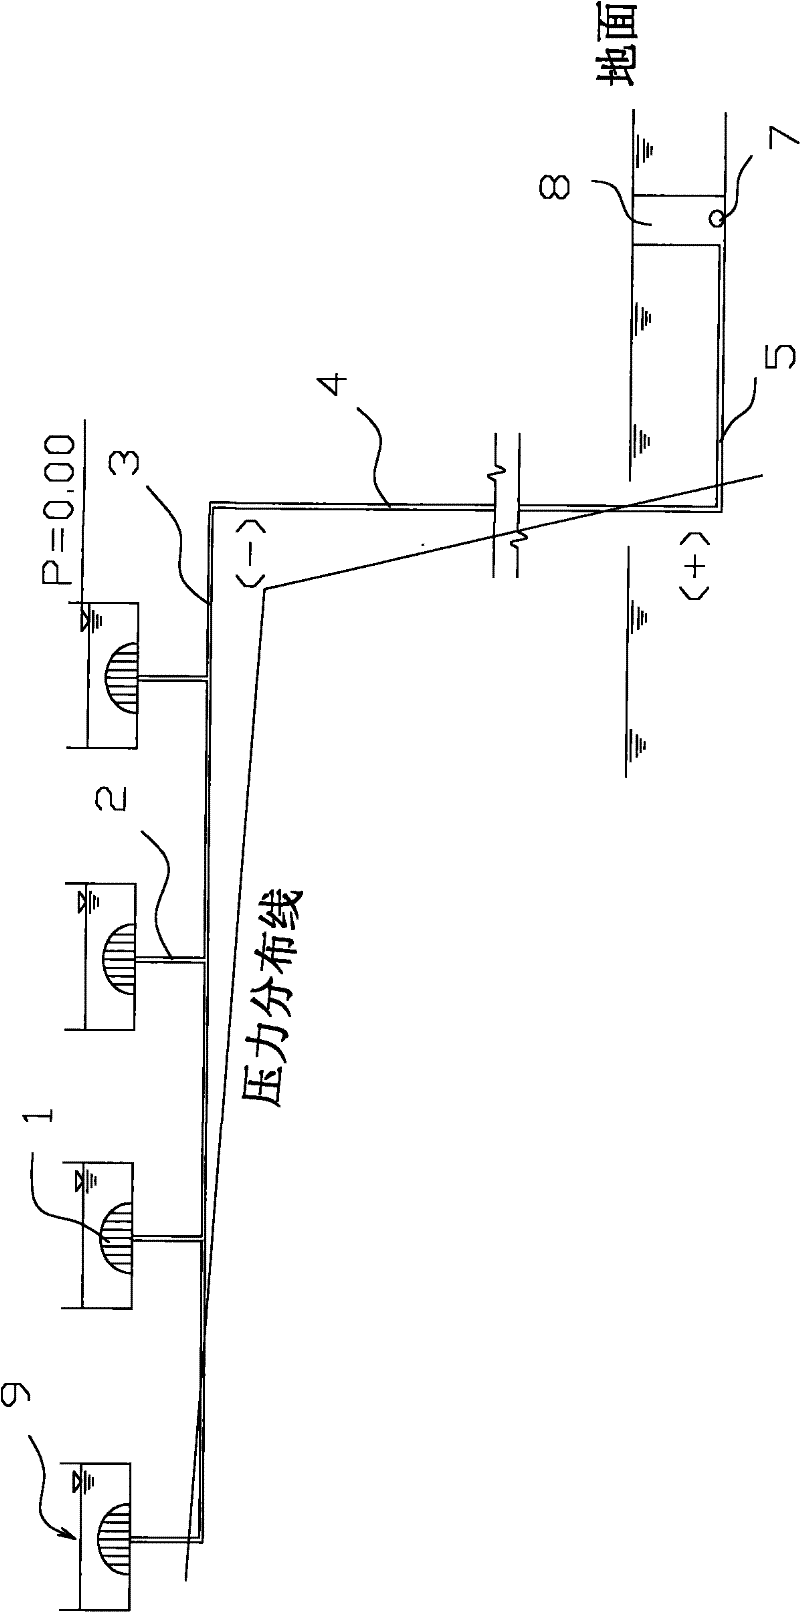 Design method and design system for roof rainwater drainage systems and drainage system